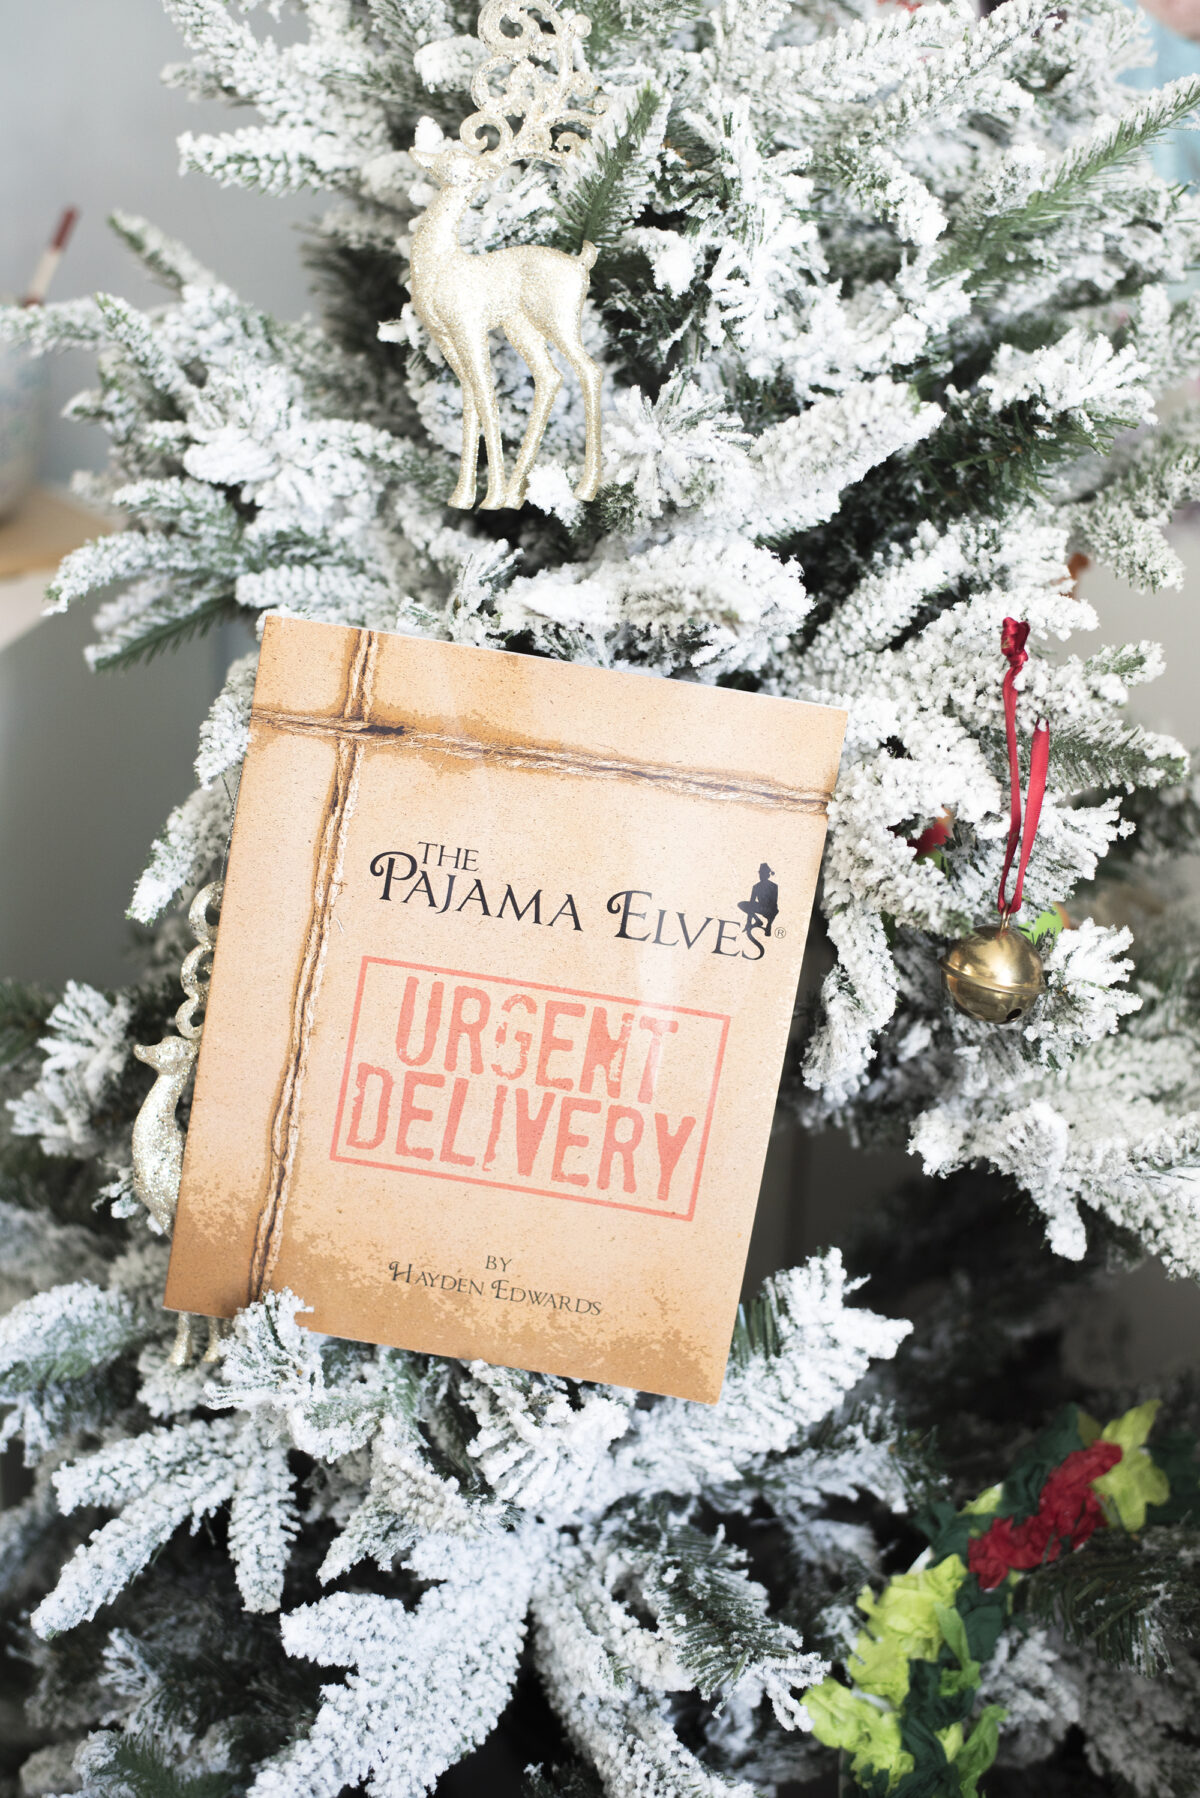 Image shows the Pyjama elves [pajama elves] book by hayden edwards in the branches of a snow covered christmas tree. Image by keep up with the jones family.